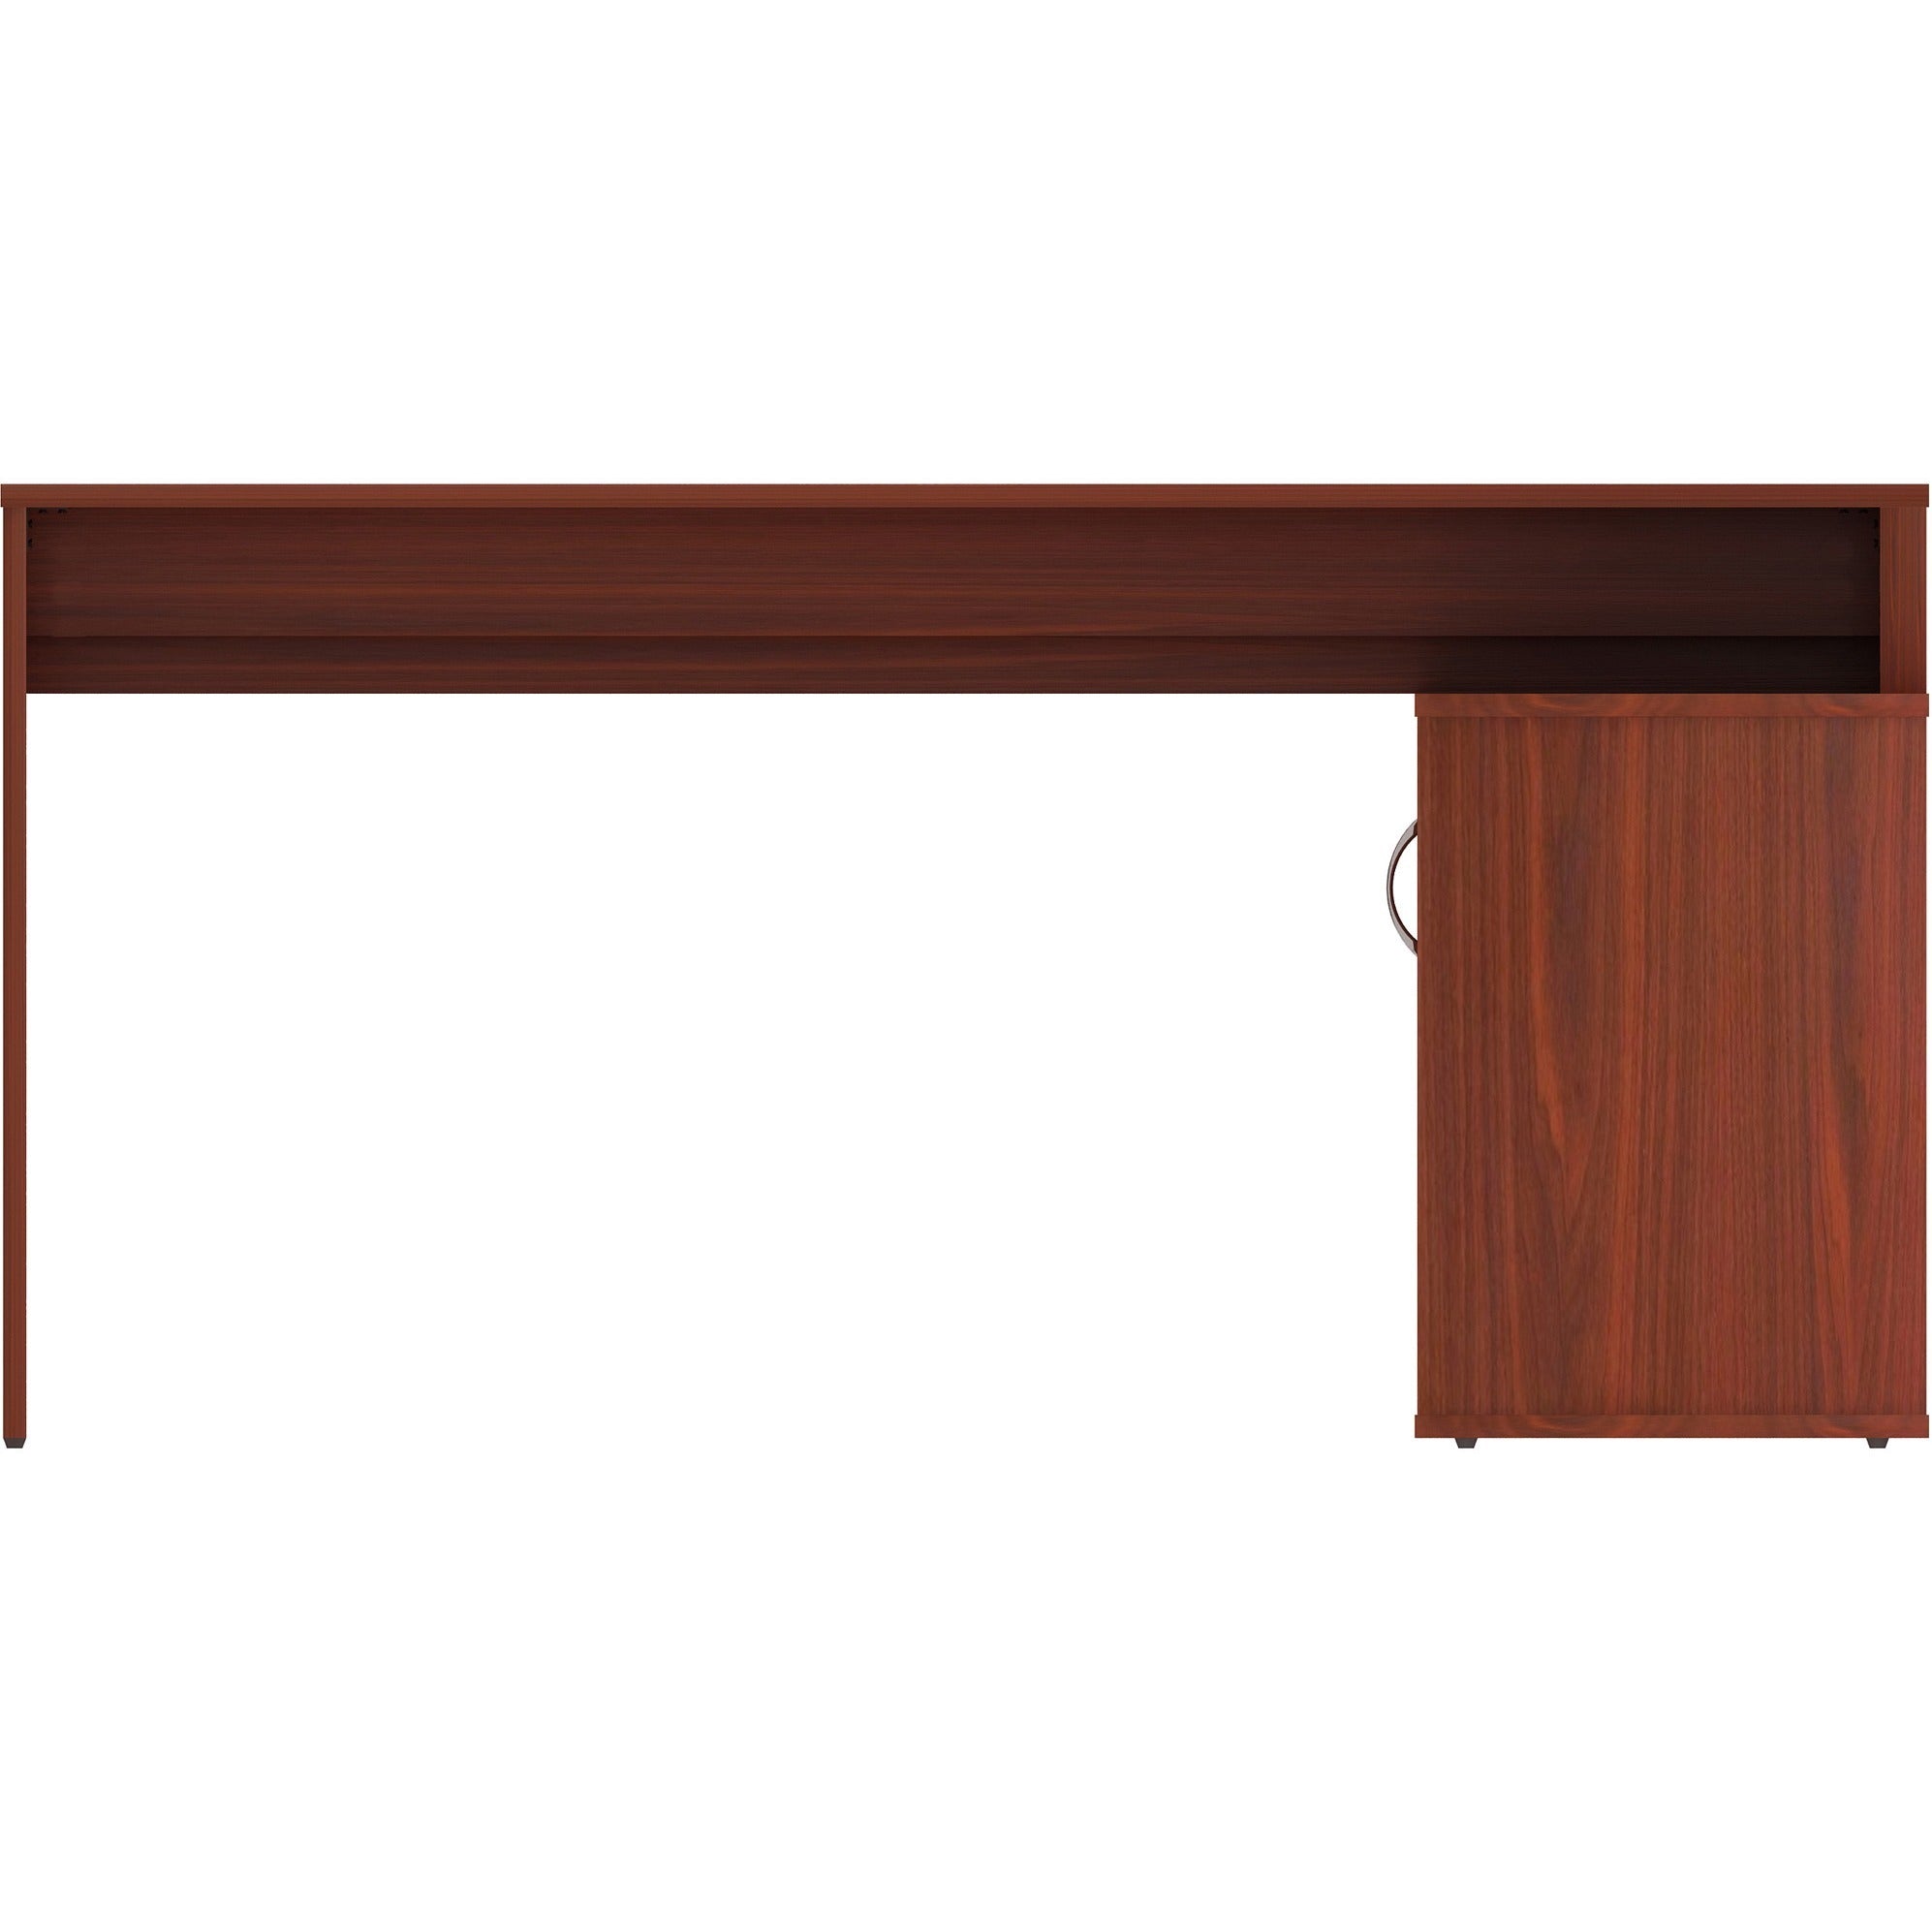 lys-l-shape-workstation-with-cabinet-for-table-toplaminated-l-shaped-top-200-lb-capacity-2950-height-x-60-width-x-4725-depth-assembly-required-mahogany-particleboard-1-each_lysdk103rrmh - 2